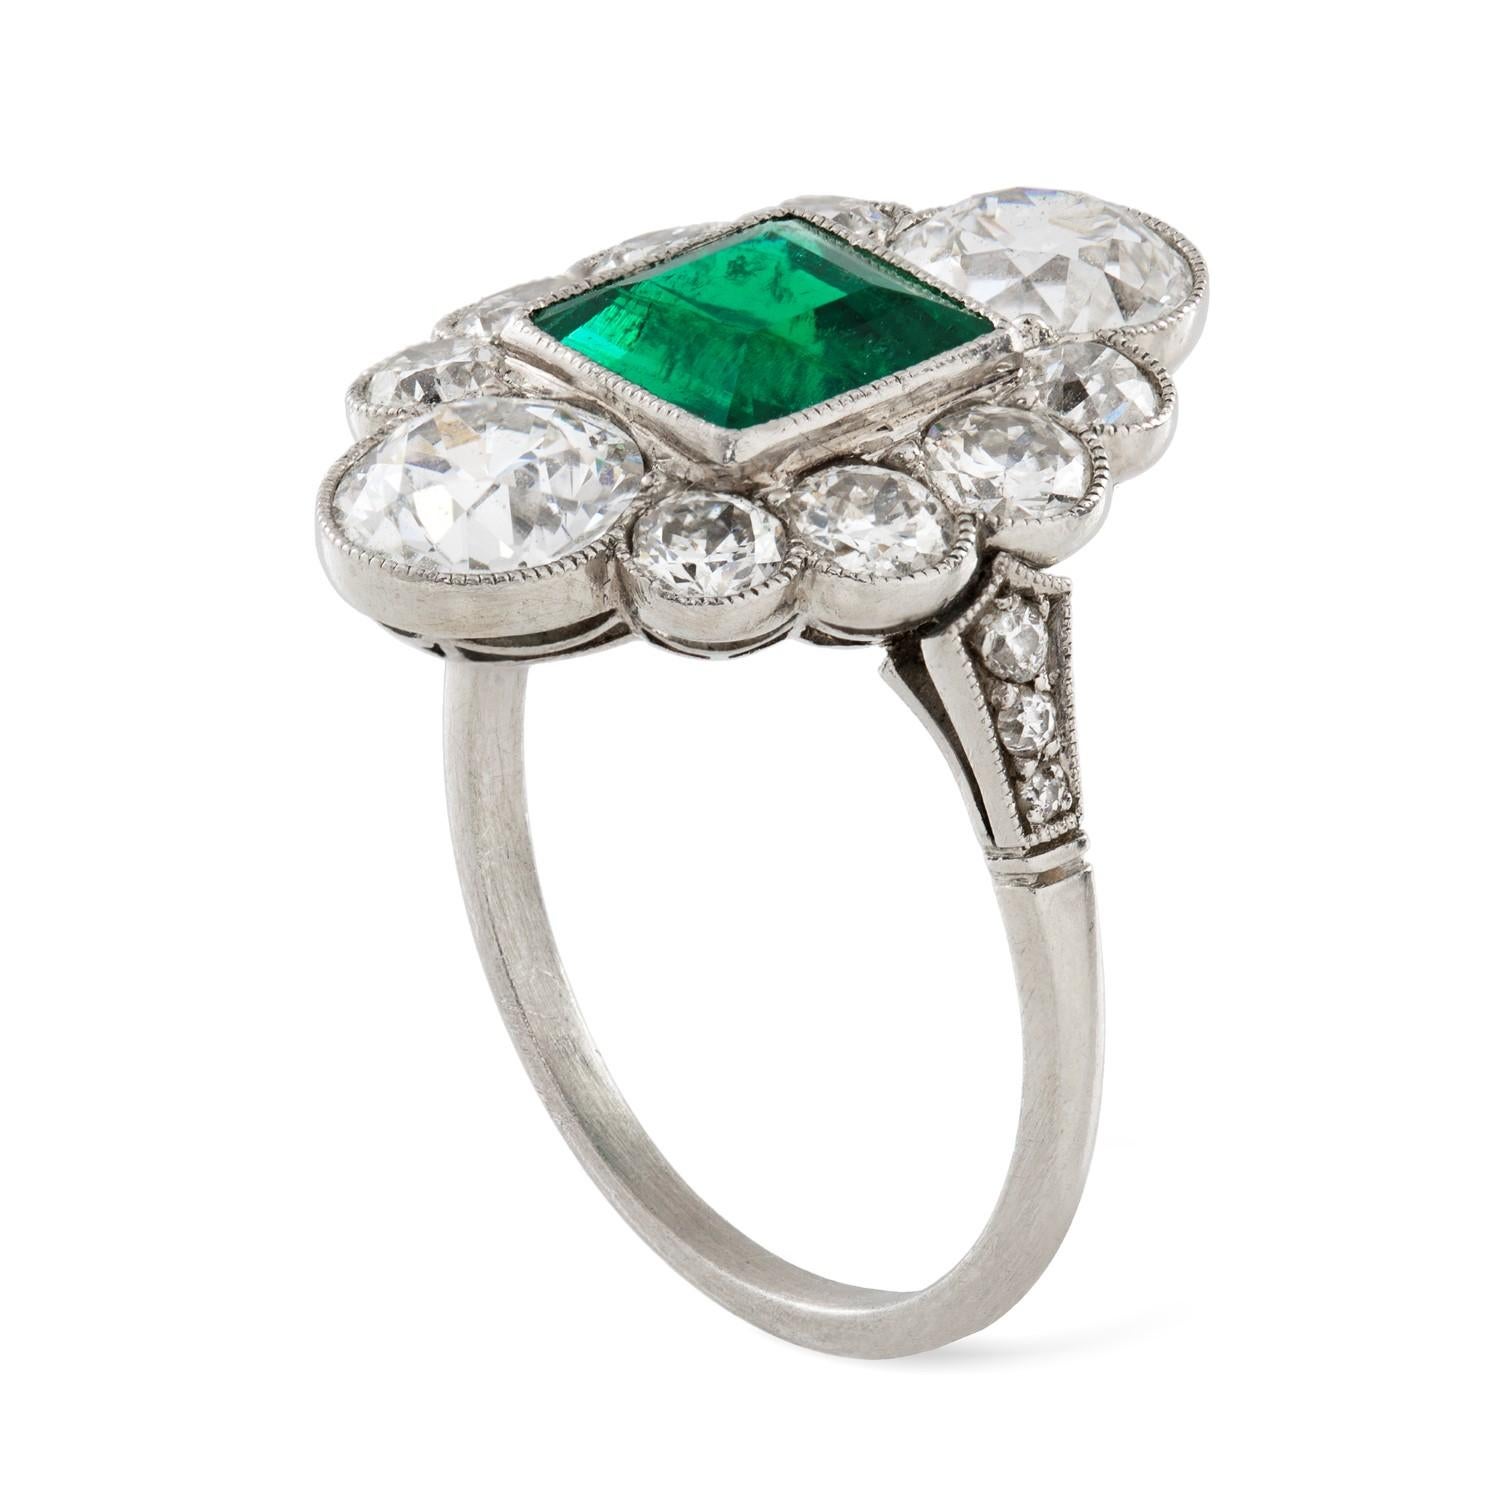 An Art Deco emerald and diamond ring, the square-cut emerald estimated to weigh 1.7 carats, accompanied by GCS Report stating to be of Colombian origin, vertically-set between two old European-cut diamonds each estimated to weigh approximately 1